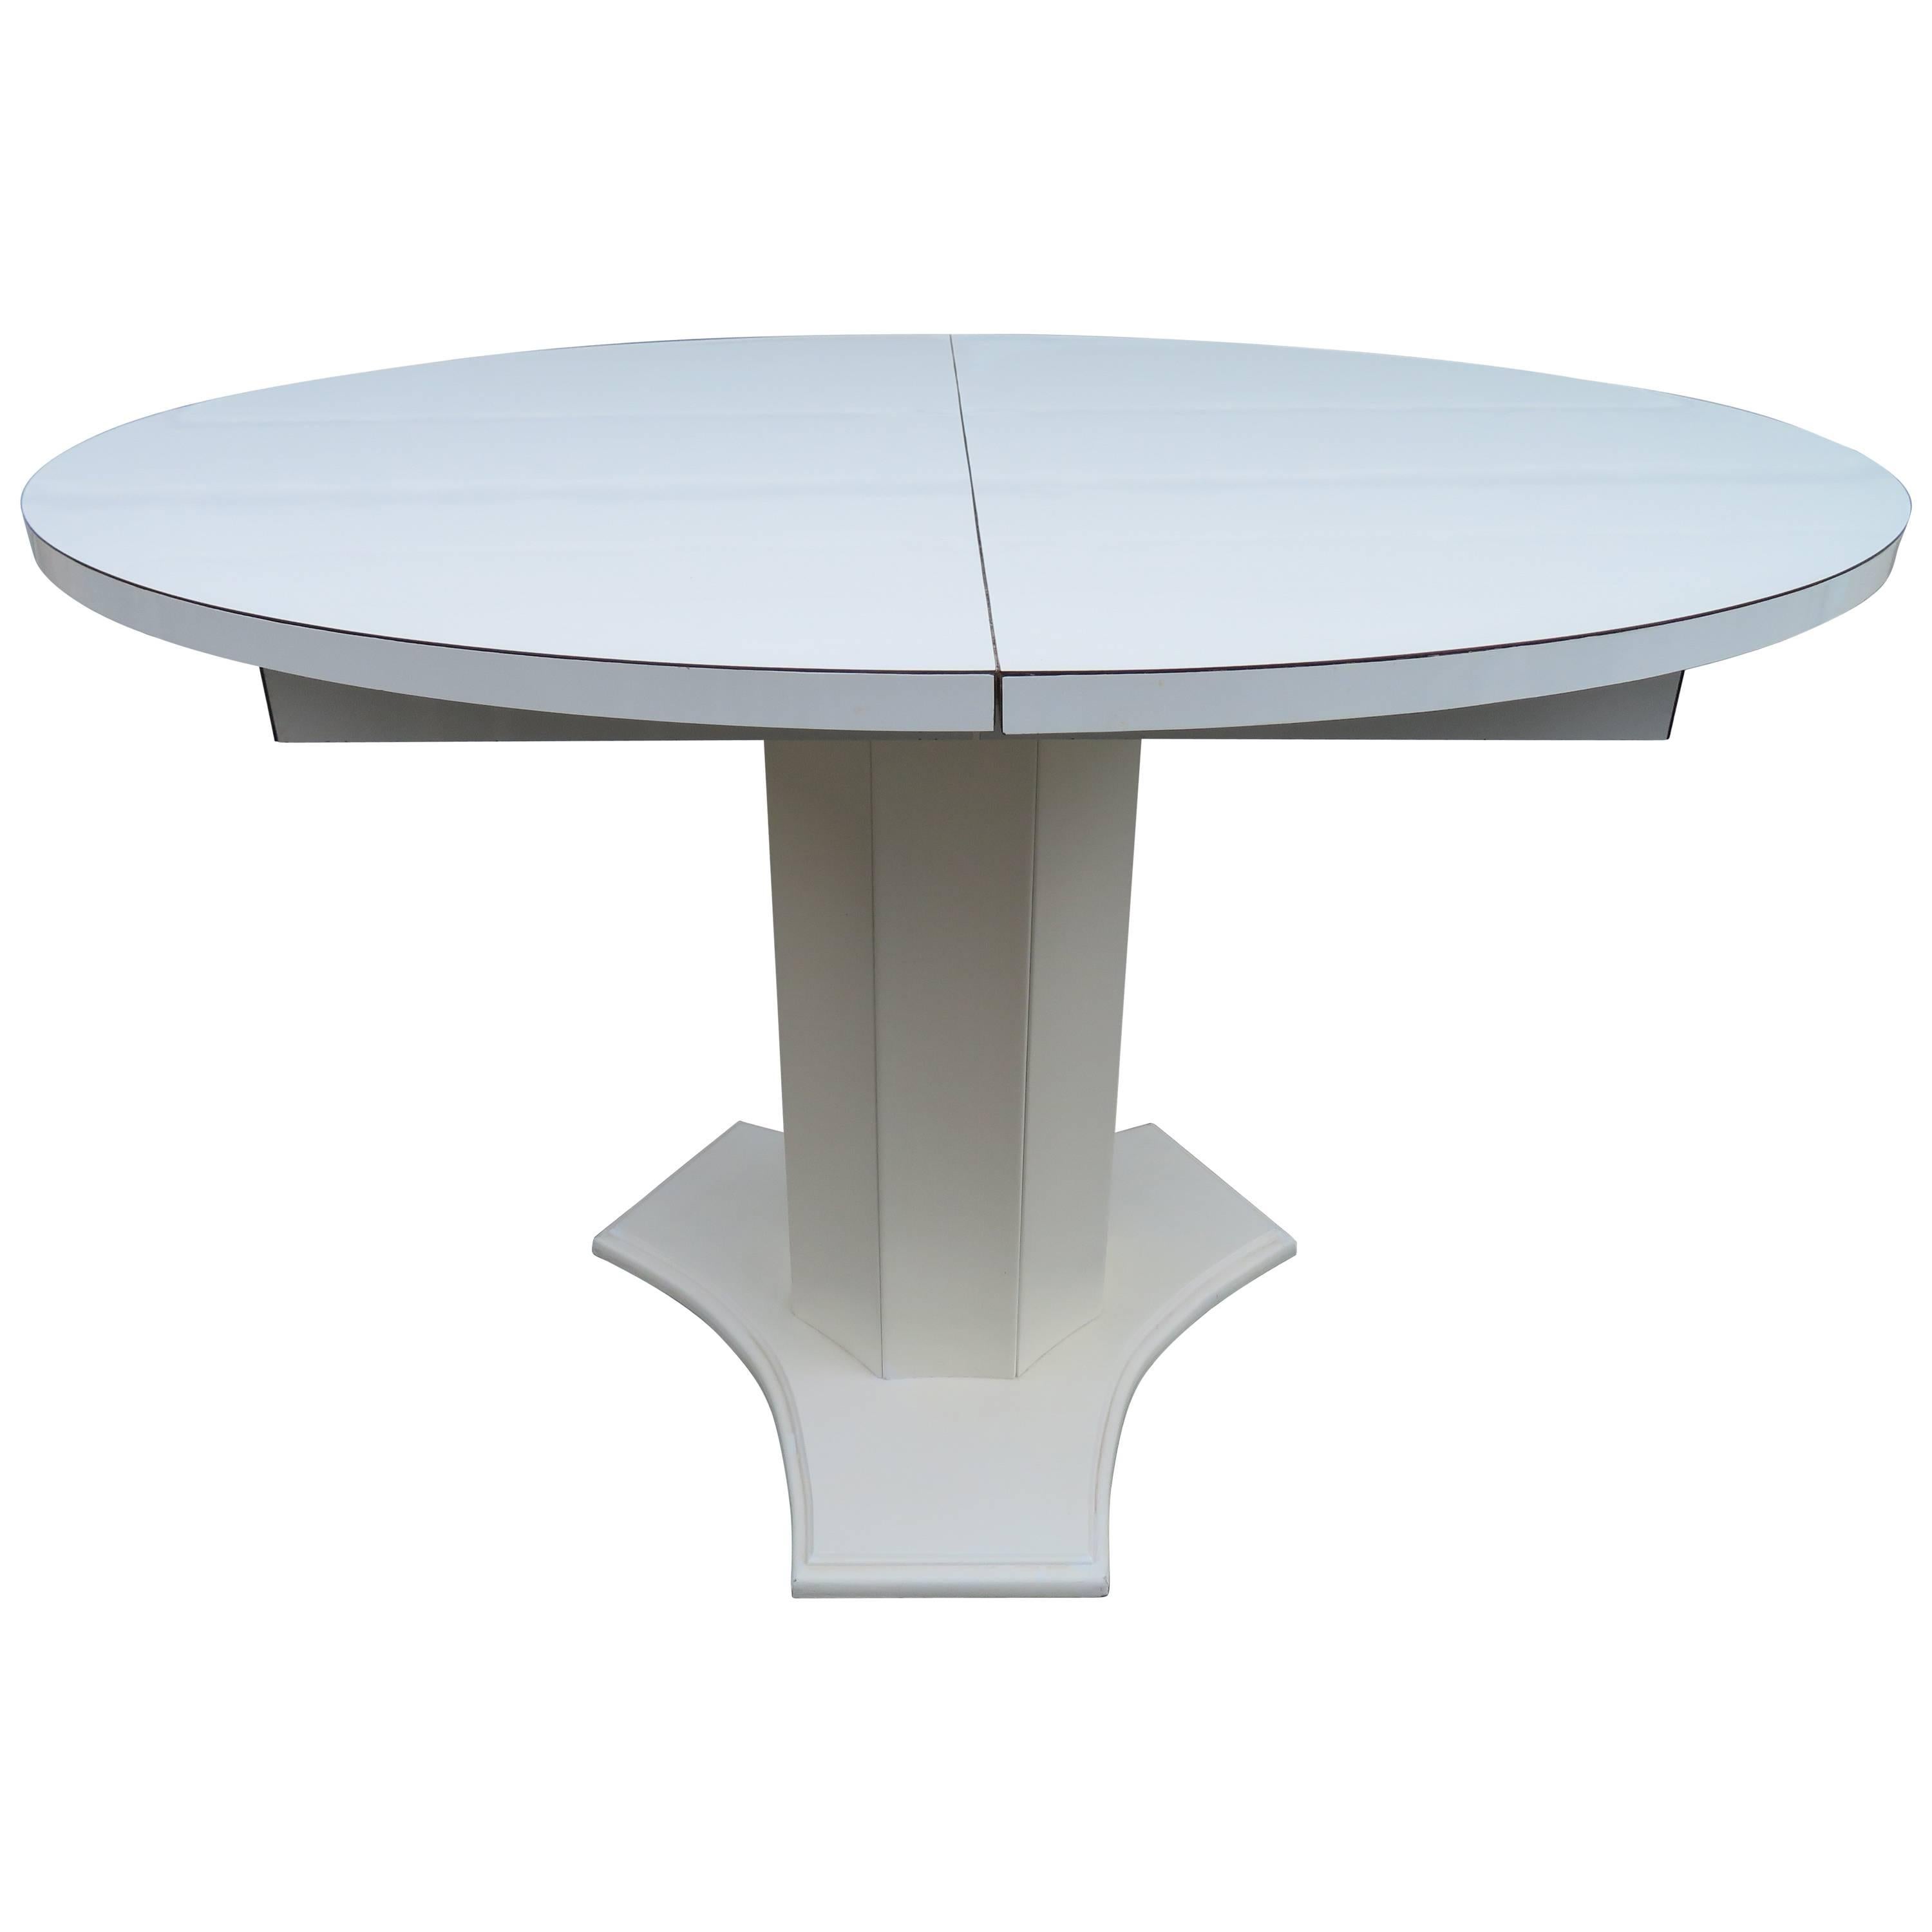 Lovely Hollywood Regency Round Dining Table For Sale